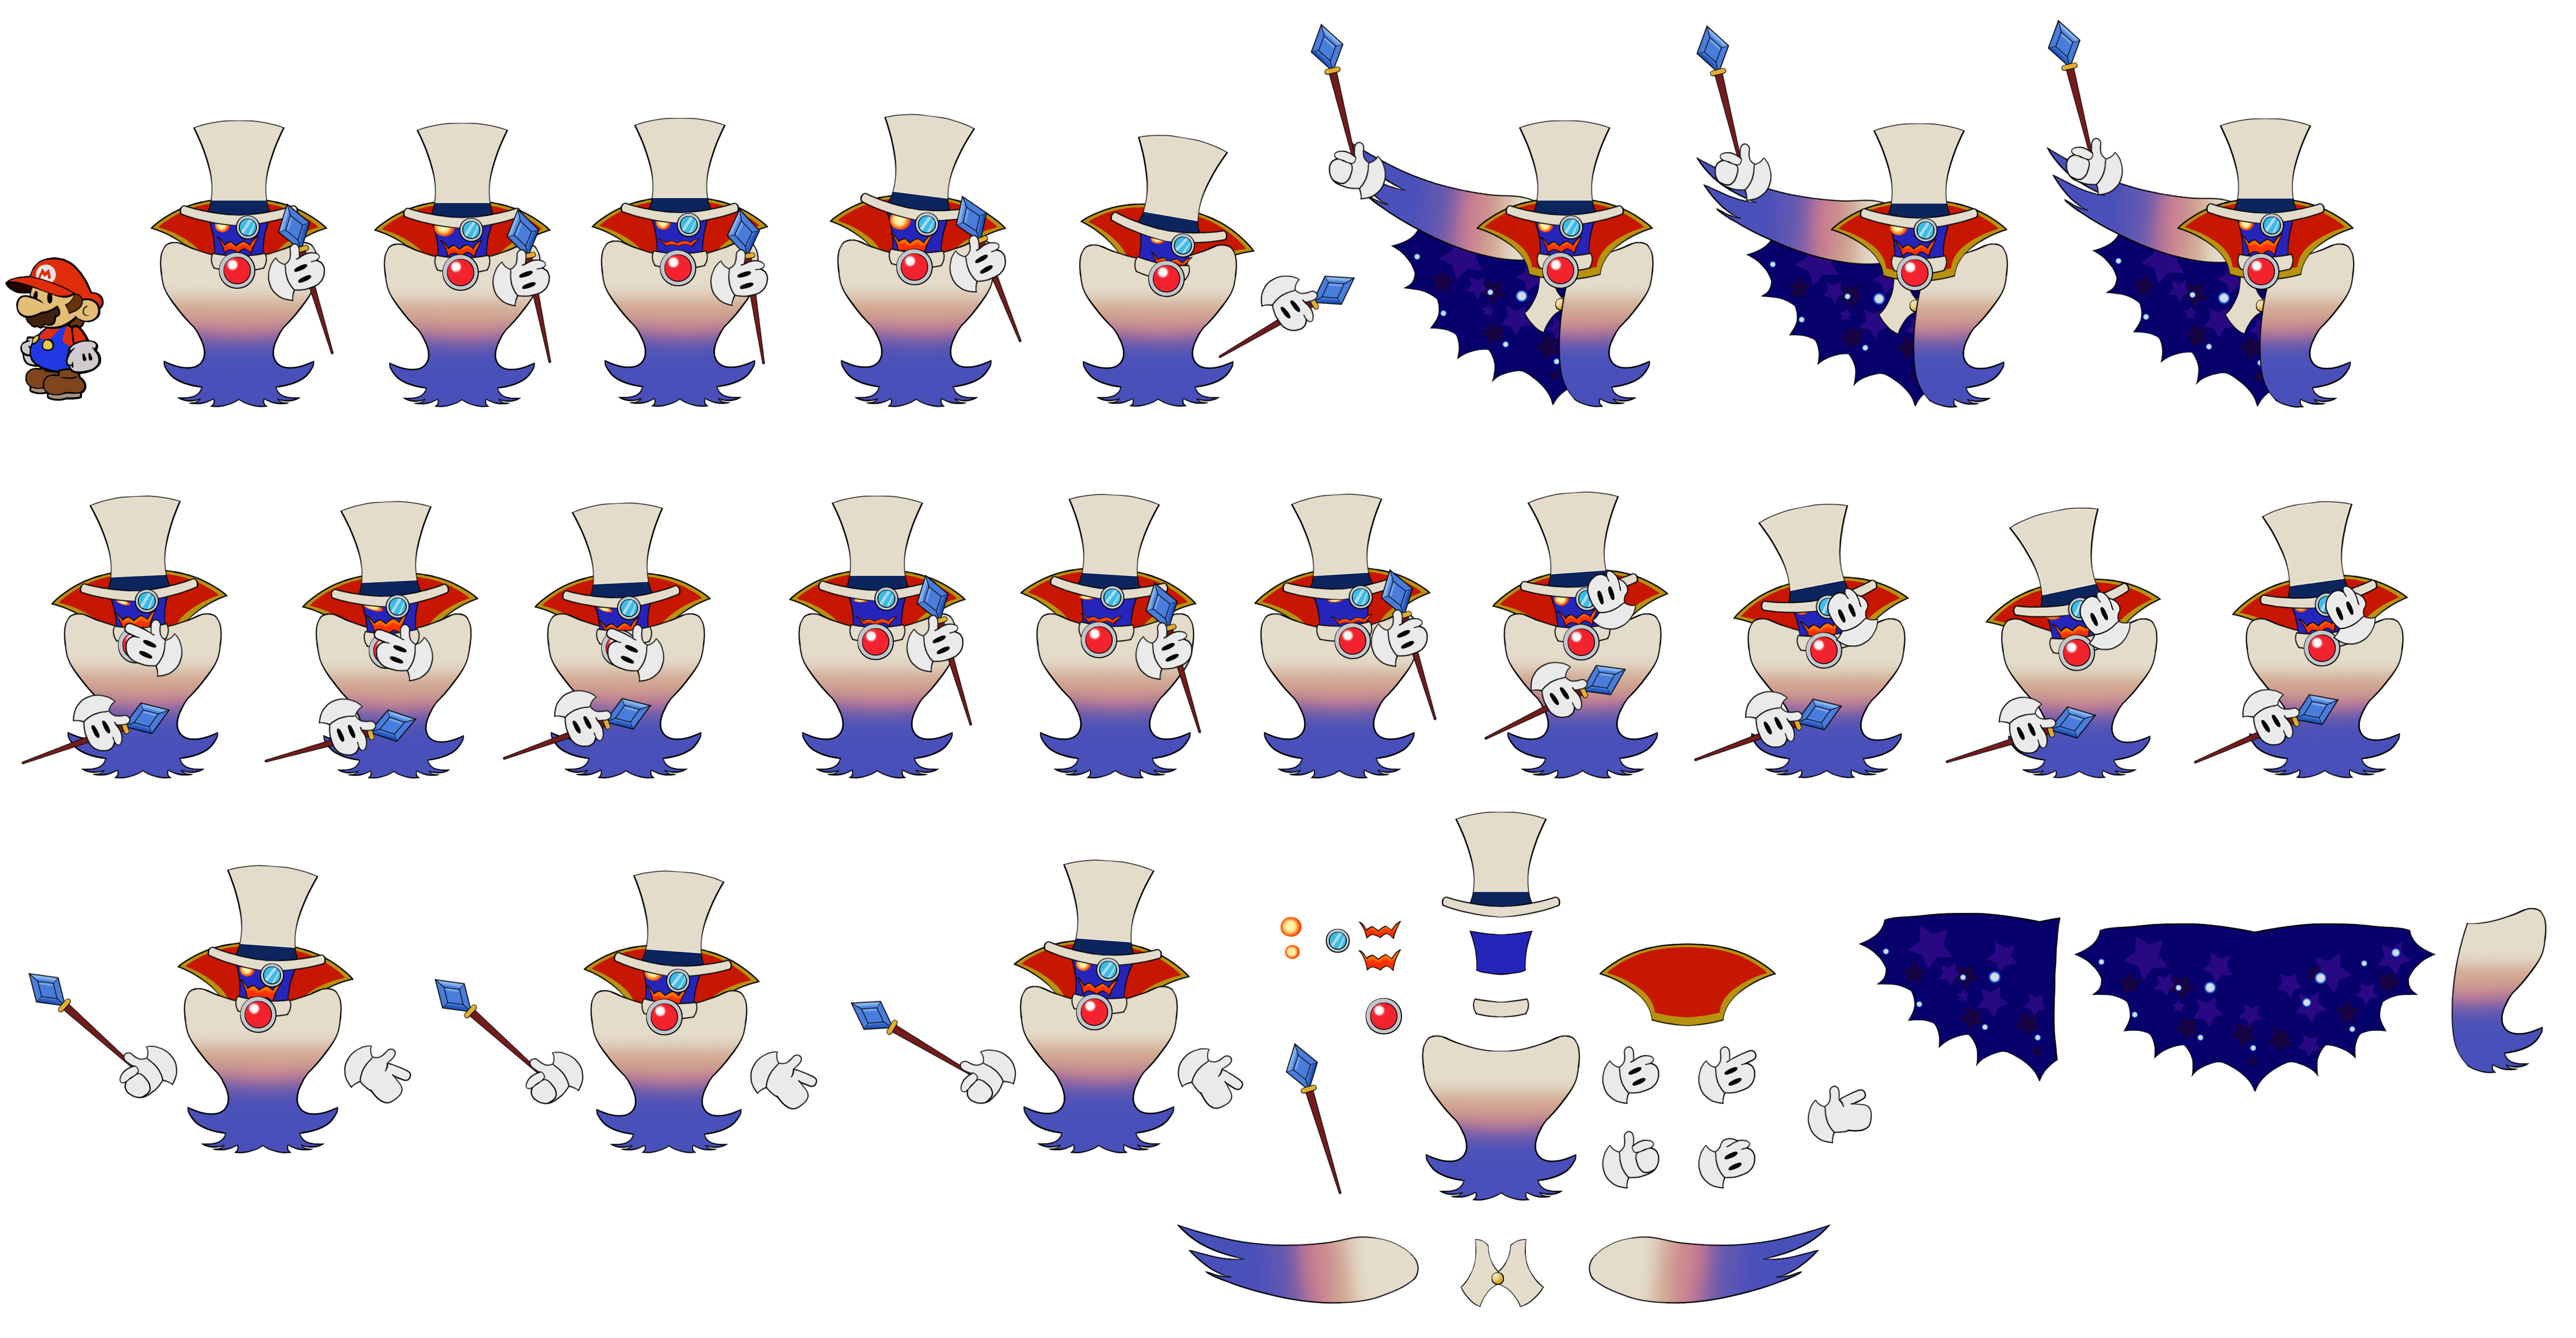 Paper Mario Customs - Count Bleck (Paper Mario-Style)